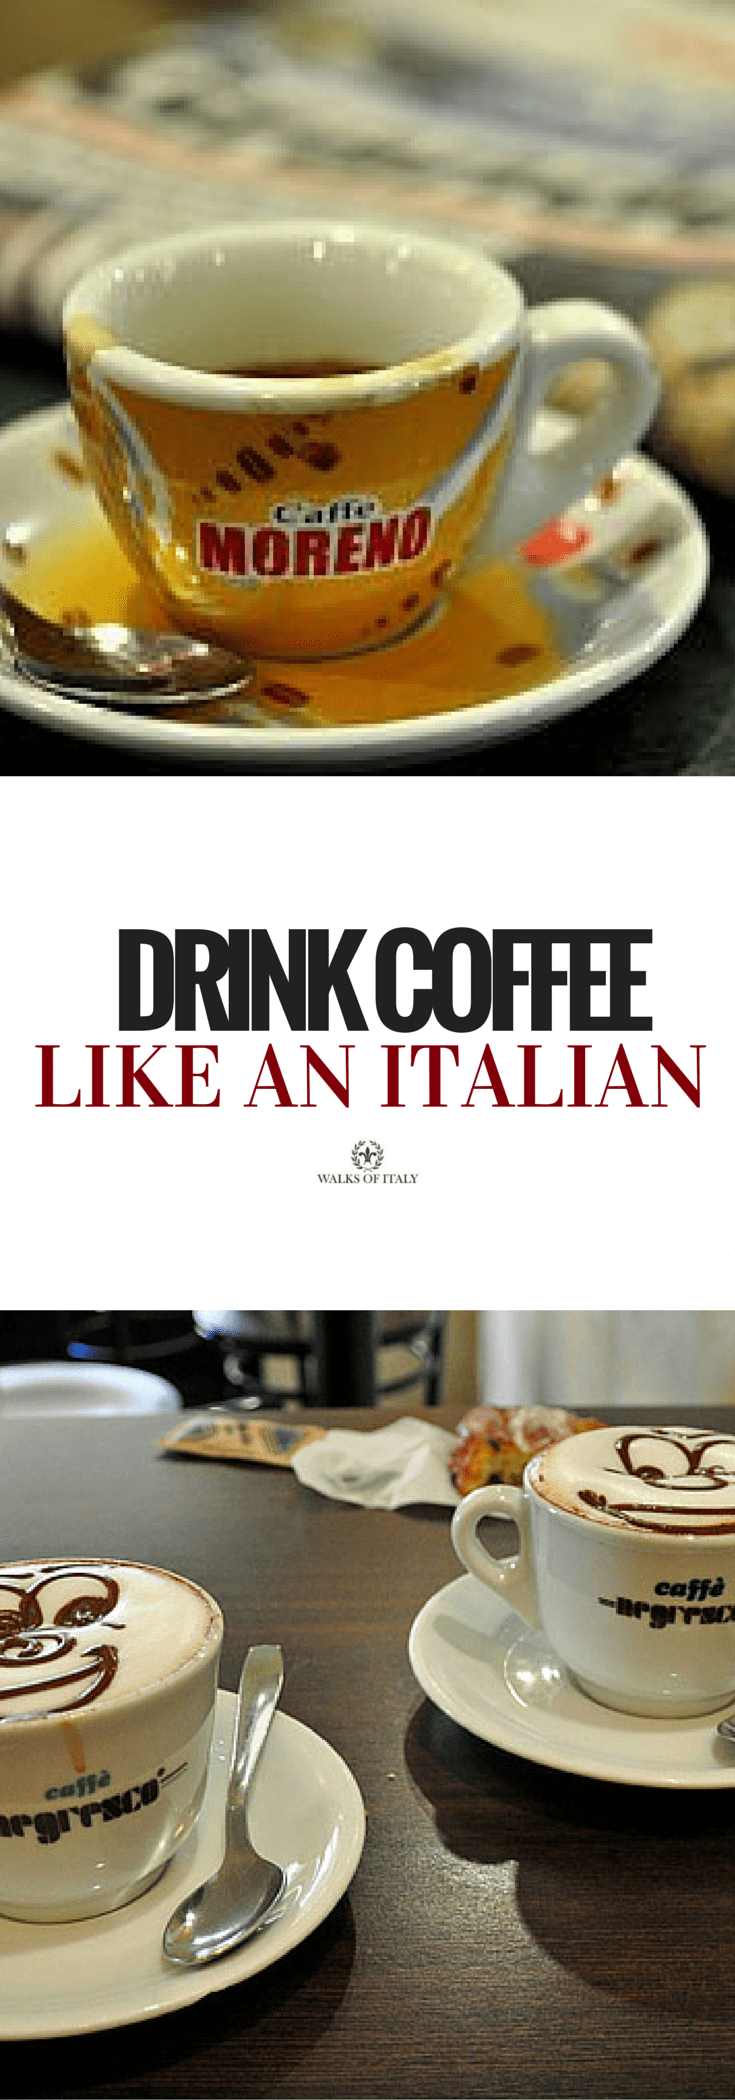 Italians love their espressos and cappuccionos. Find out how to drink coffee like an Italian.